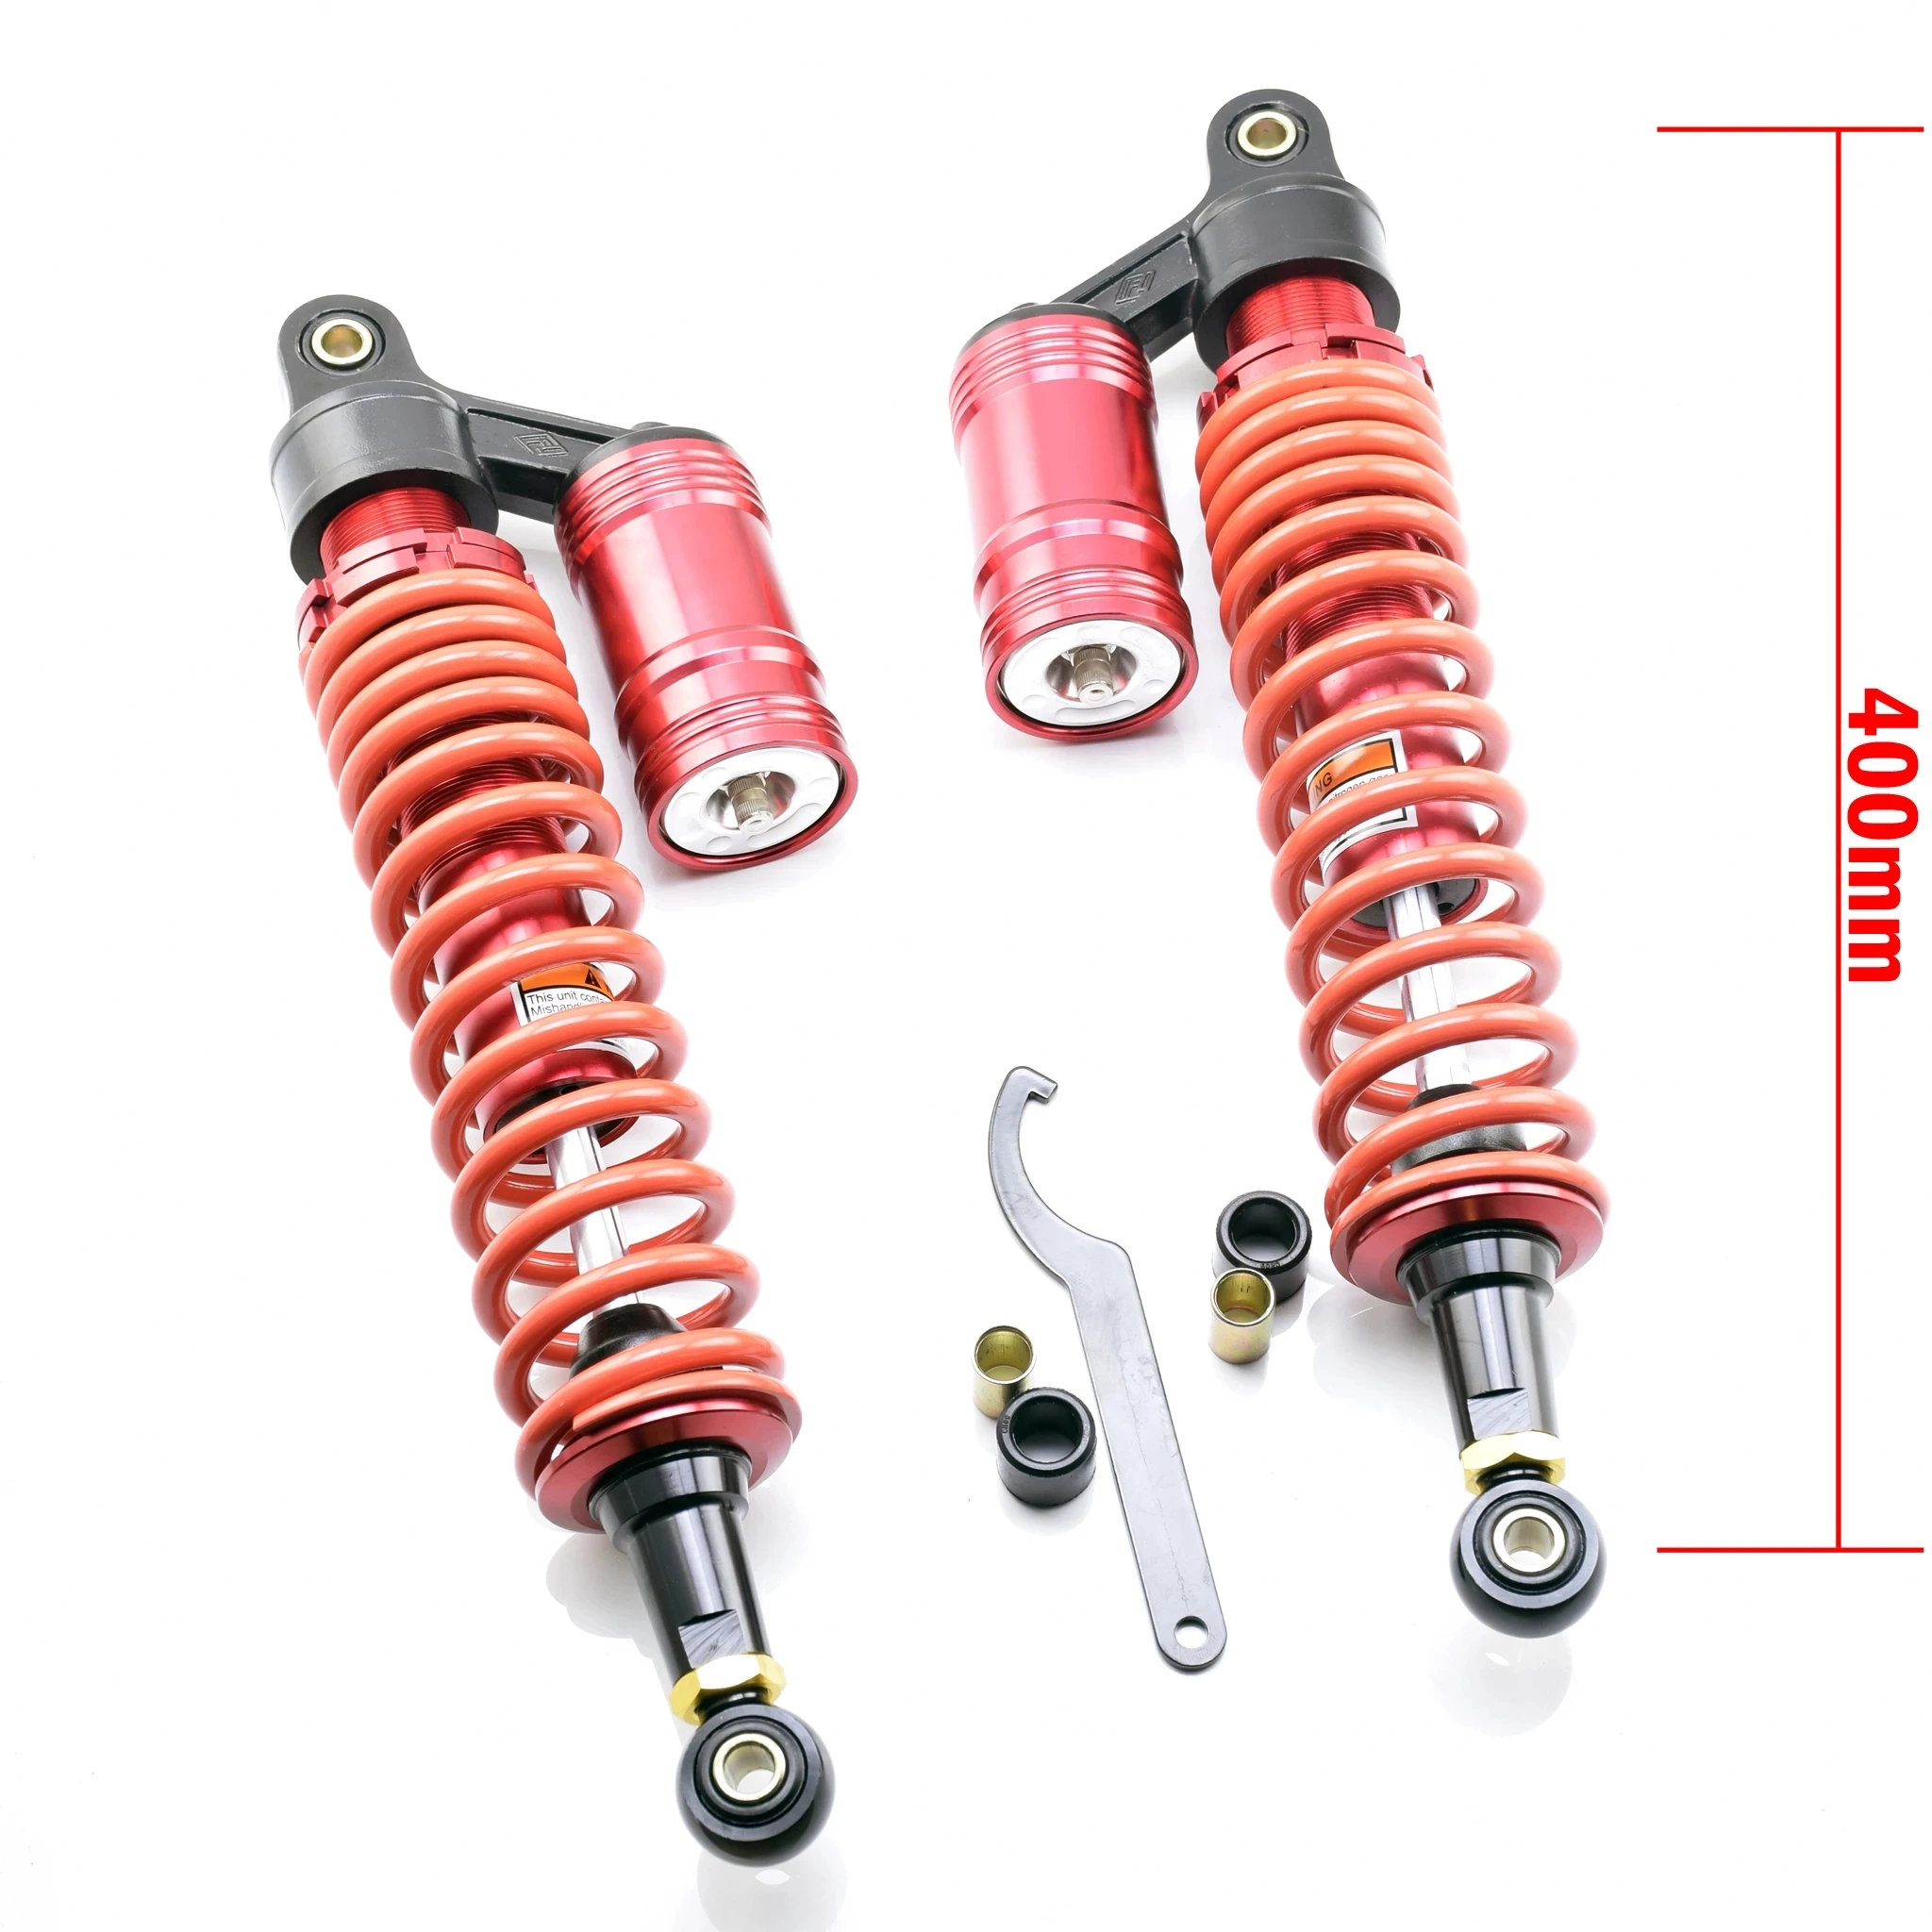 Accesorios Para Moto For RFY400 Damping Adjustment Is Suitable for The  Forza MAX300 350 NSS250Maxsym400 Shock Absorber Dirt Bike - AliExpress